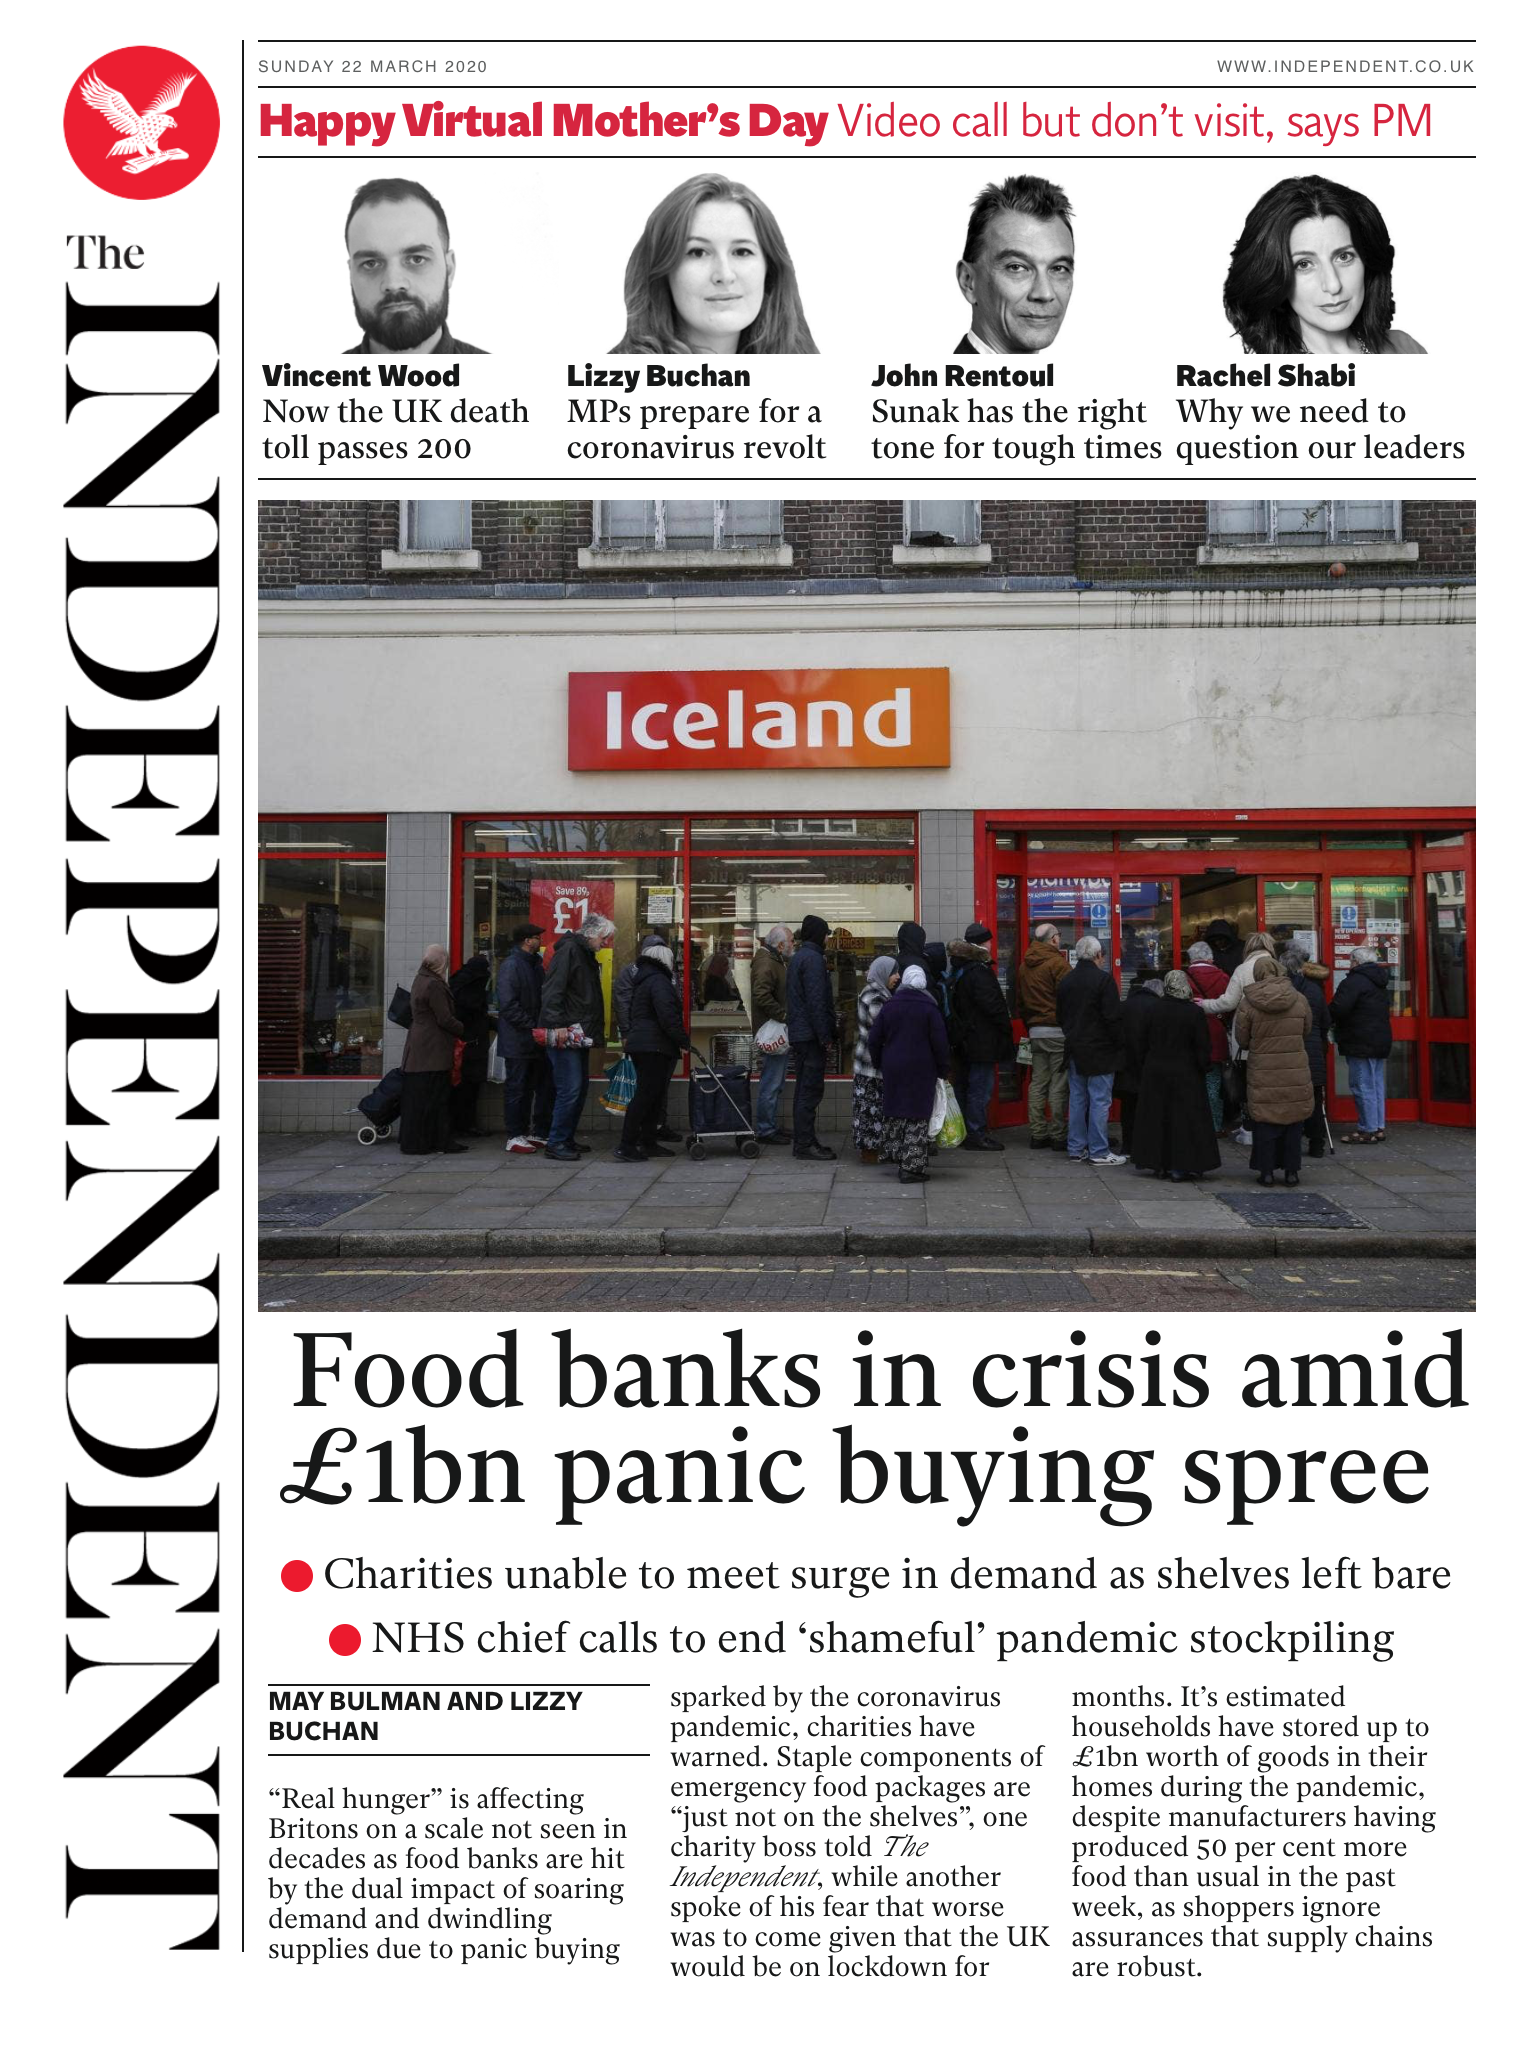 The Independent Daily Edition front page, 22 March 2020